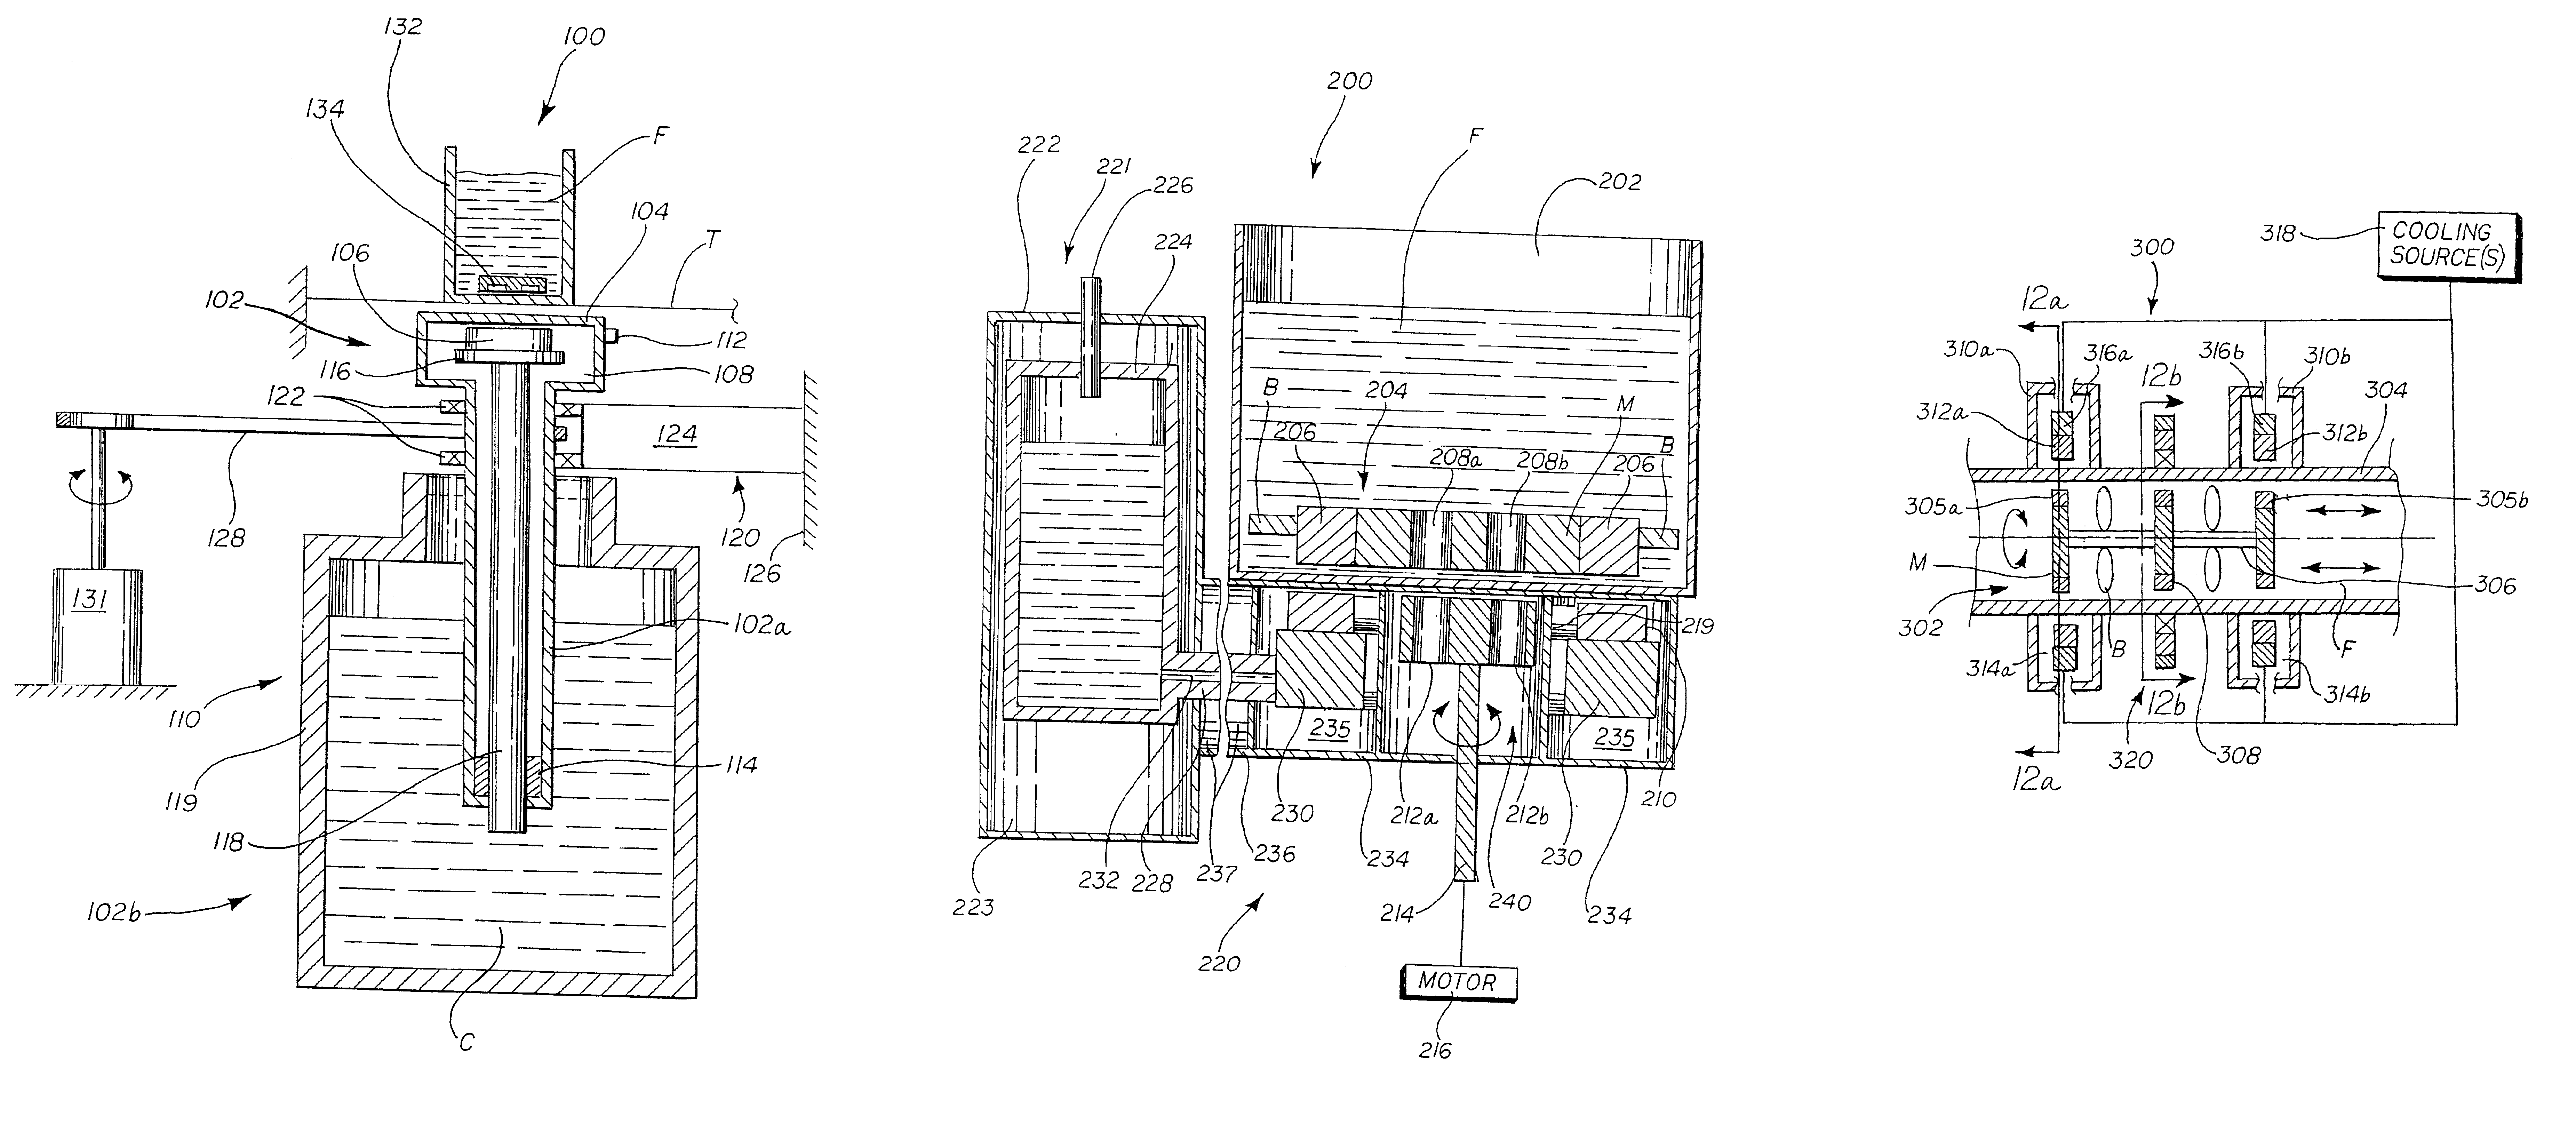 Sterile fluid pumping or mixing system and related method